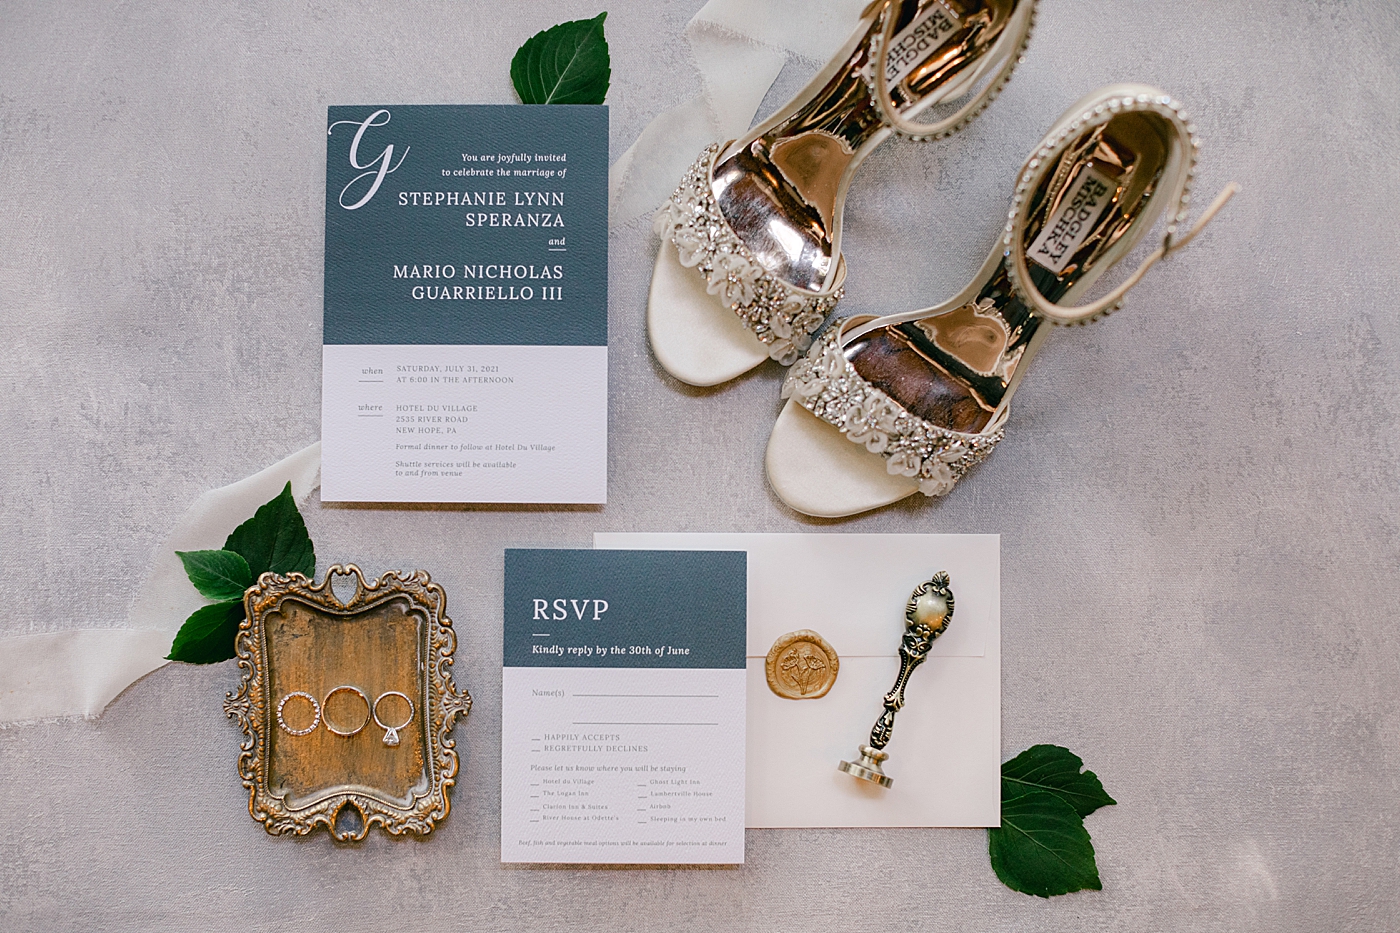 Bridal details with invitation suite during Hotel du Village Wedding | Image by Hope Helmuth Photography